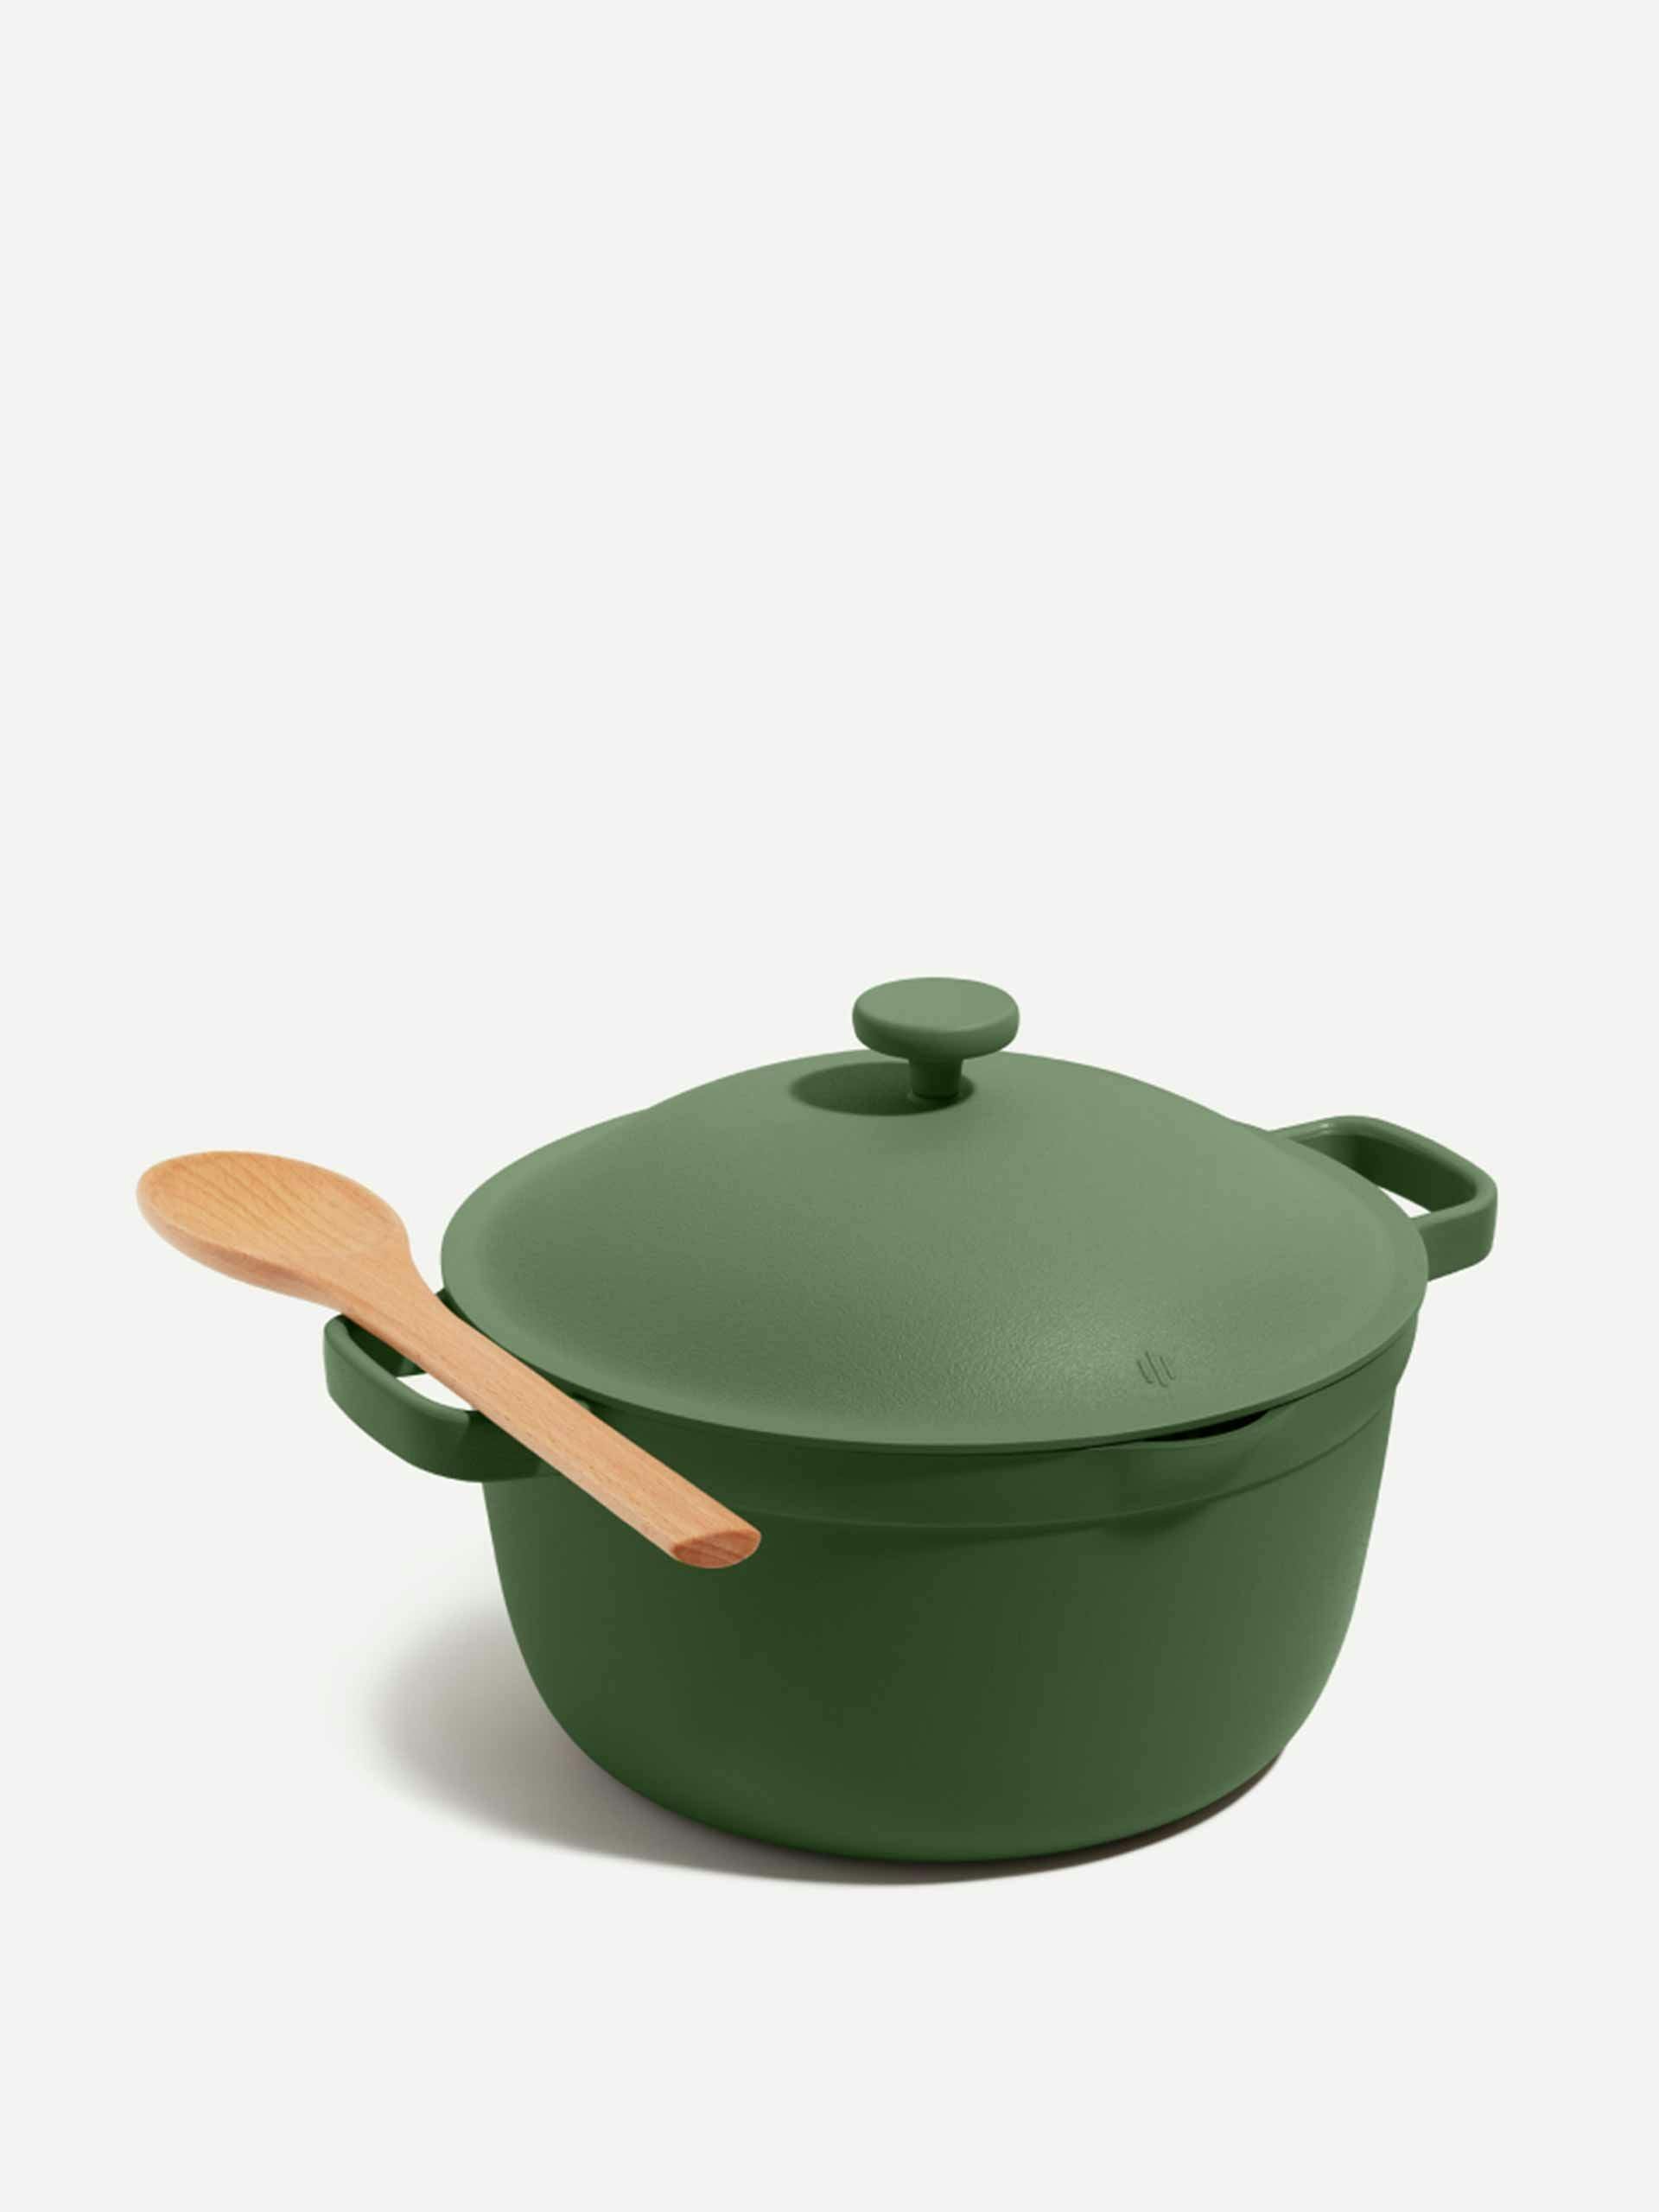 Perfect Pot in sage green